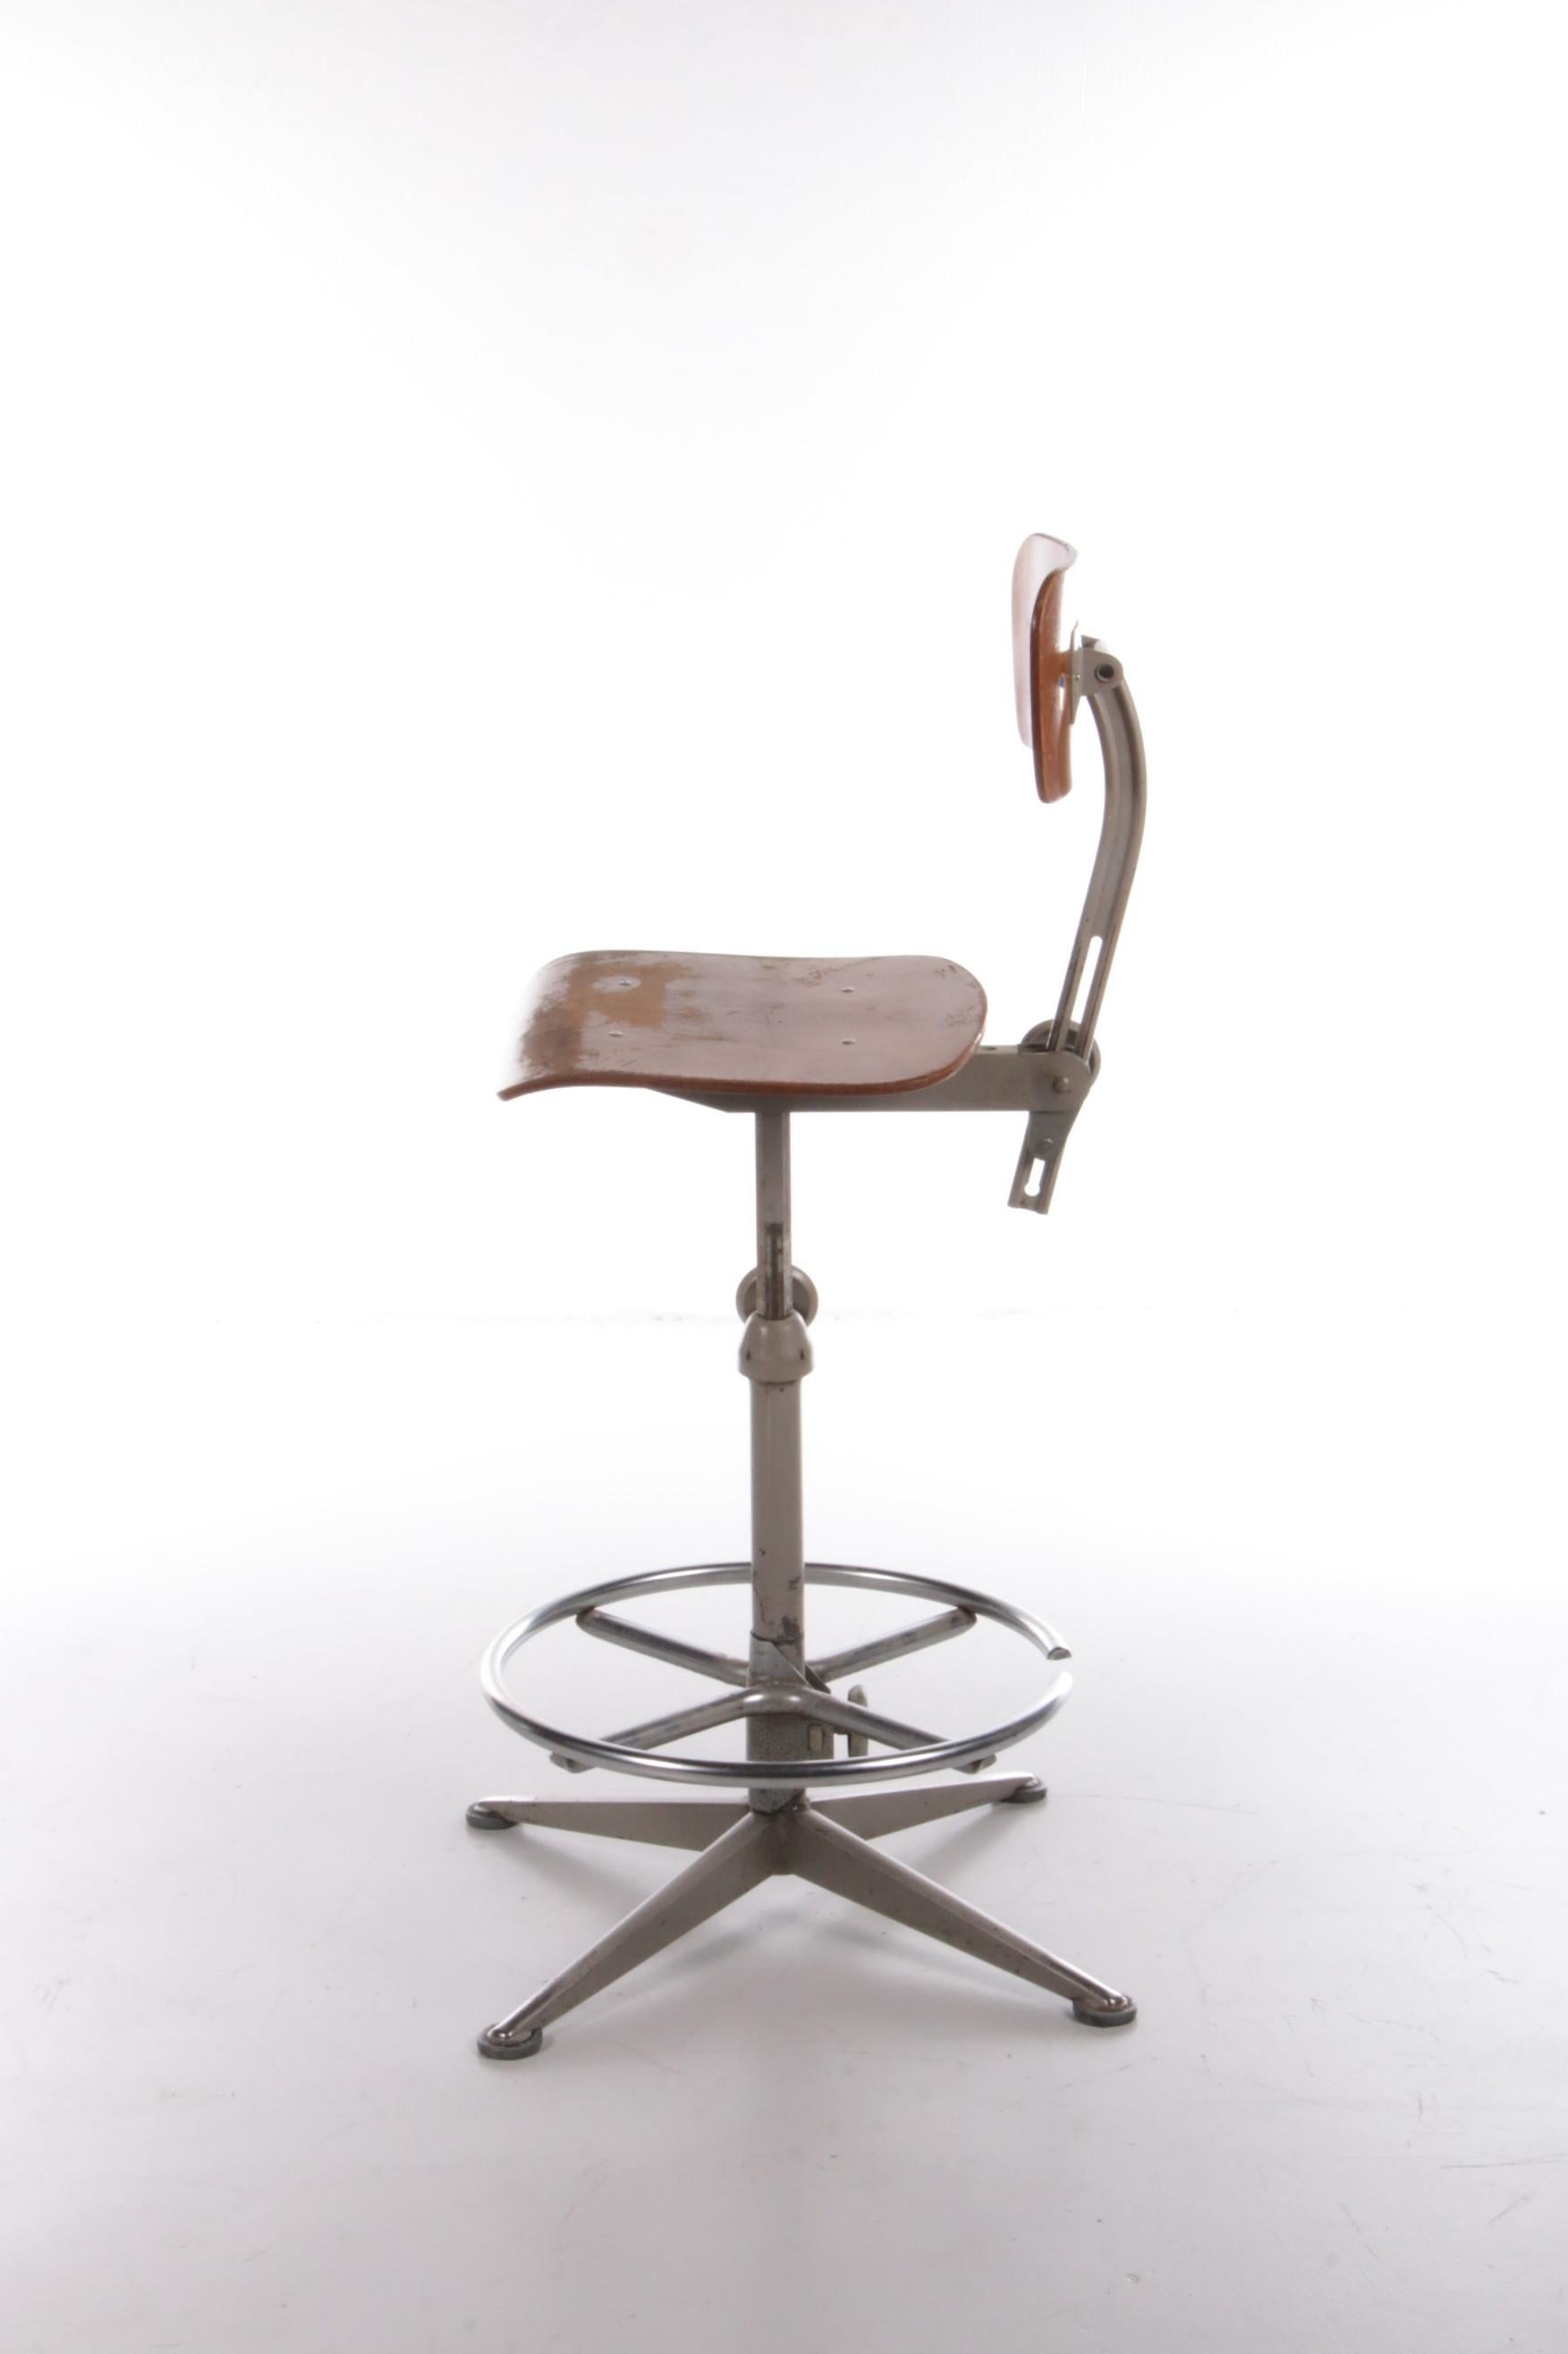 Dutch Industrial Drawing Table Chair by Friso Kramer for Ahrend, ca 1960